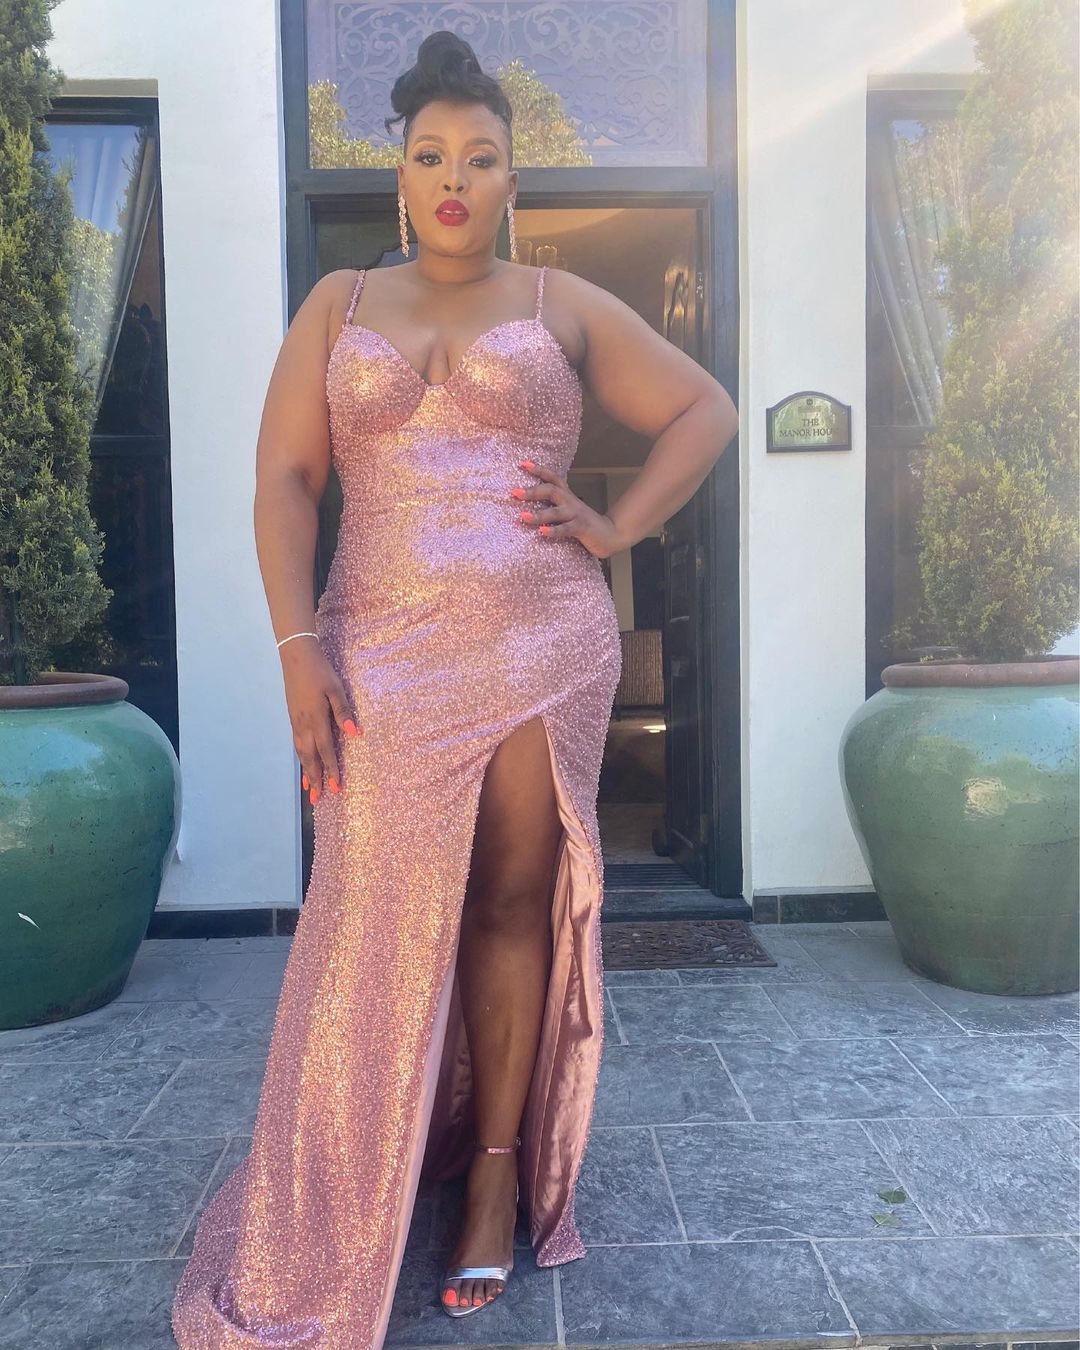 Anele Mdoda was called out as a hypocrite for a cyberbullying tweet she sent after Riky Rick's death